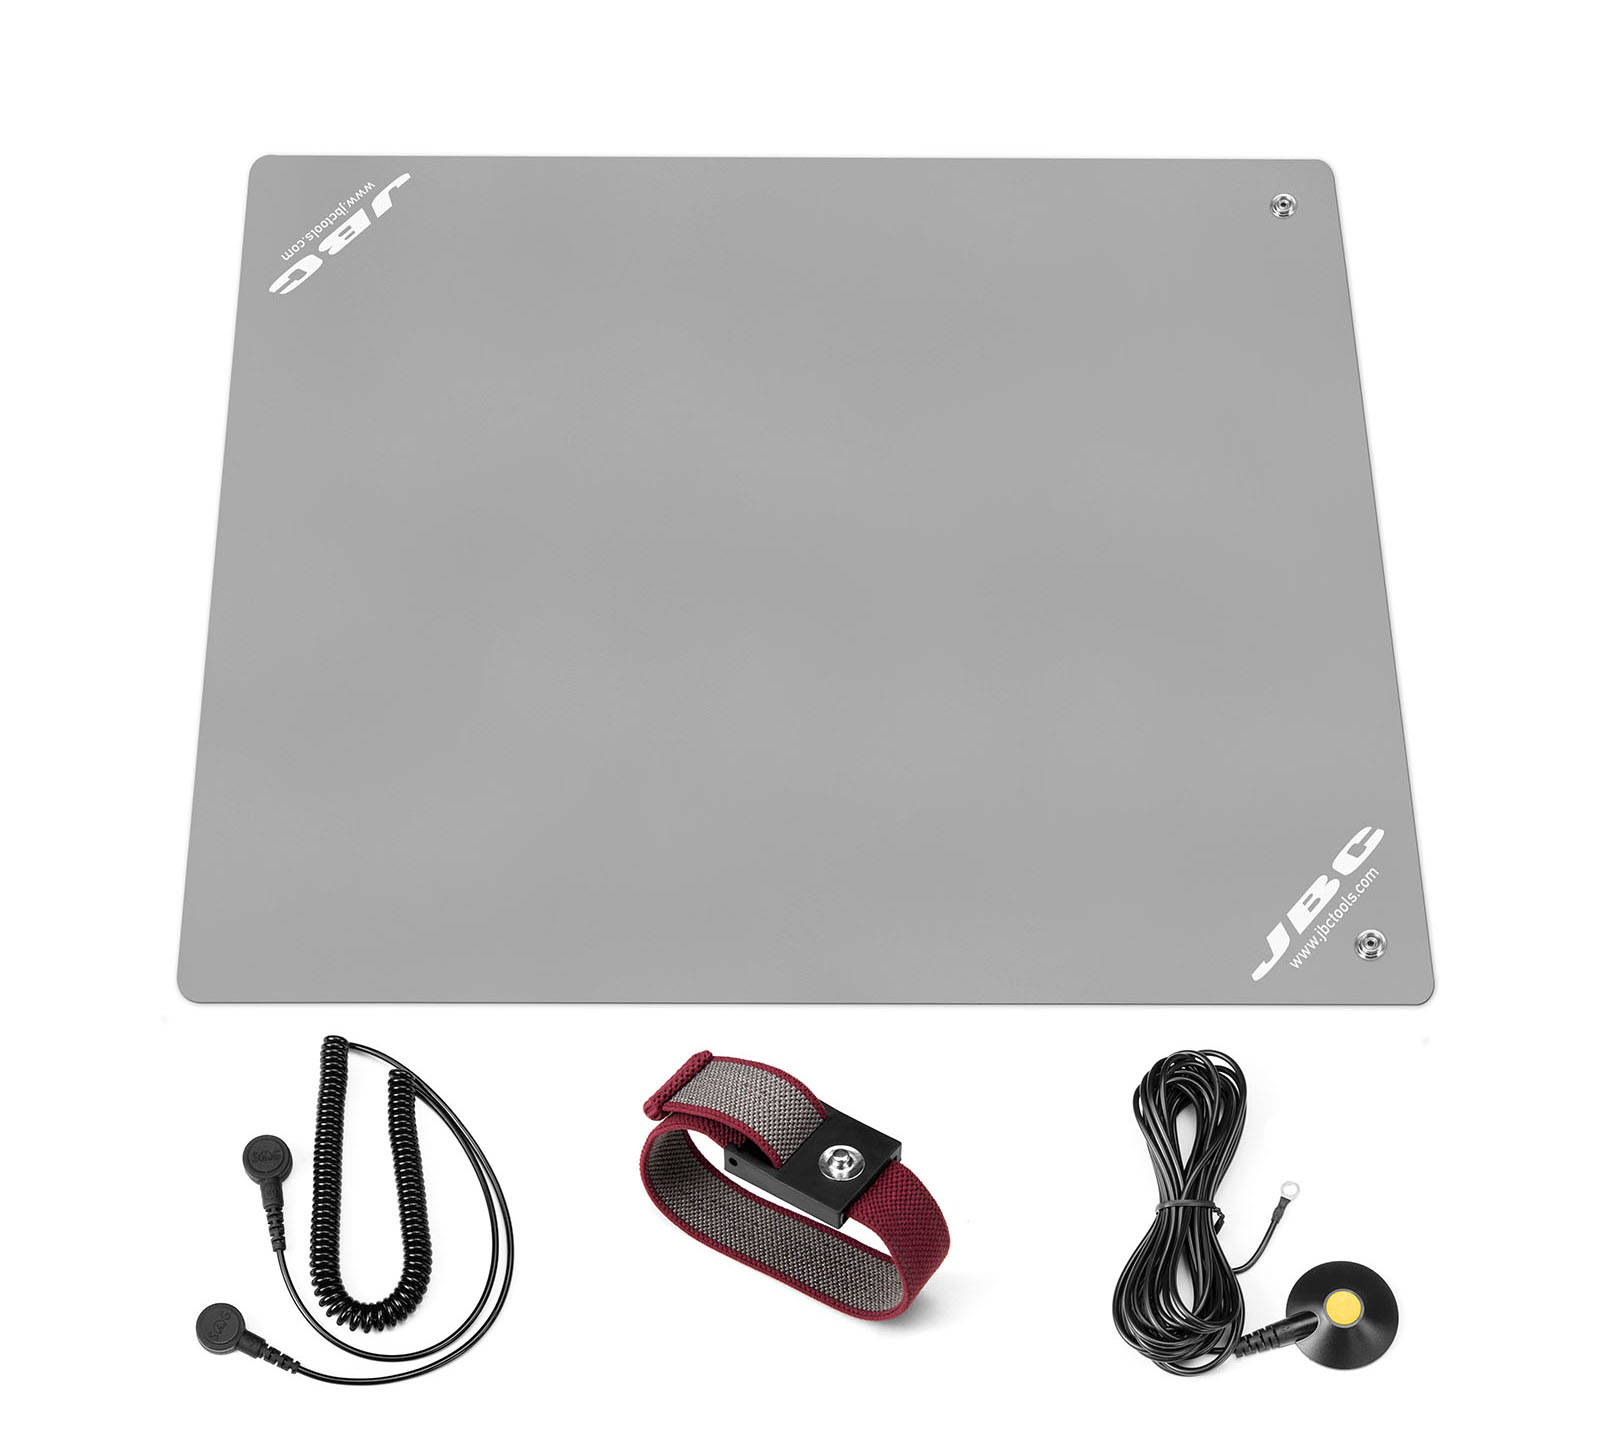 TMS-KA - ESD Table Mat Set 450 x 600 mm /<br> 17.71 x 23.62 in